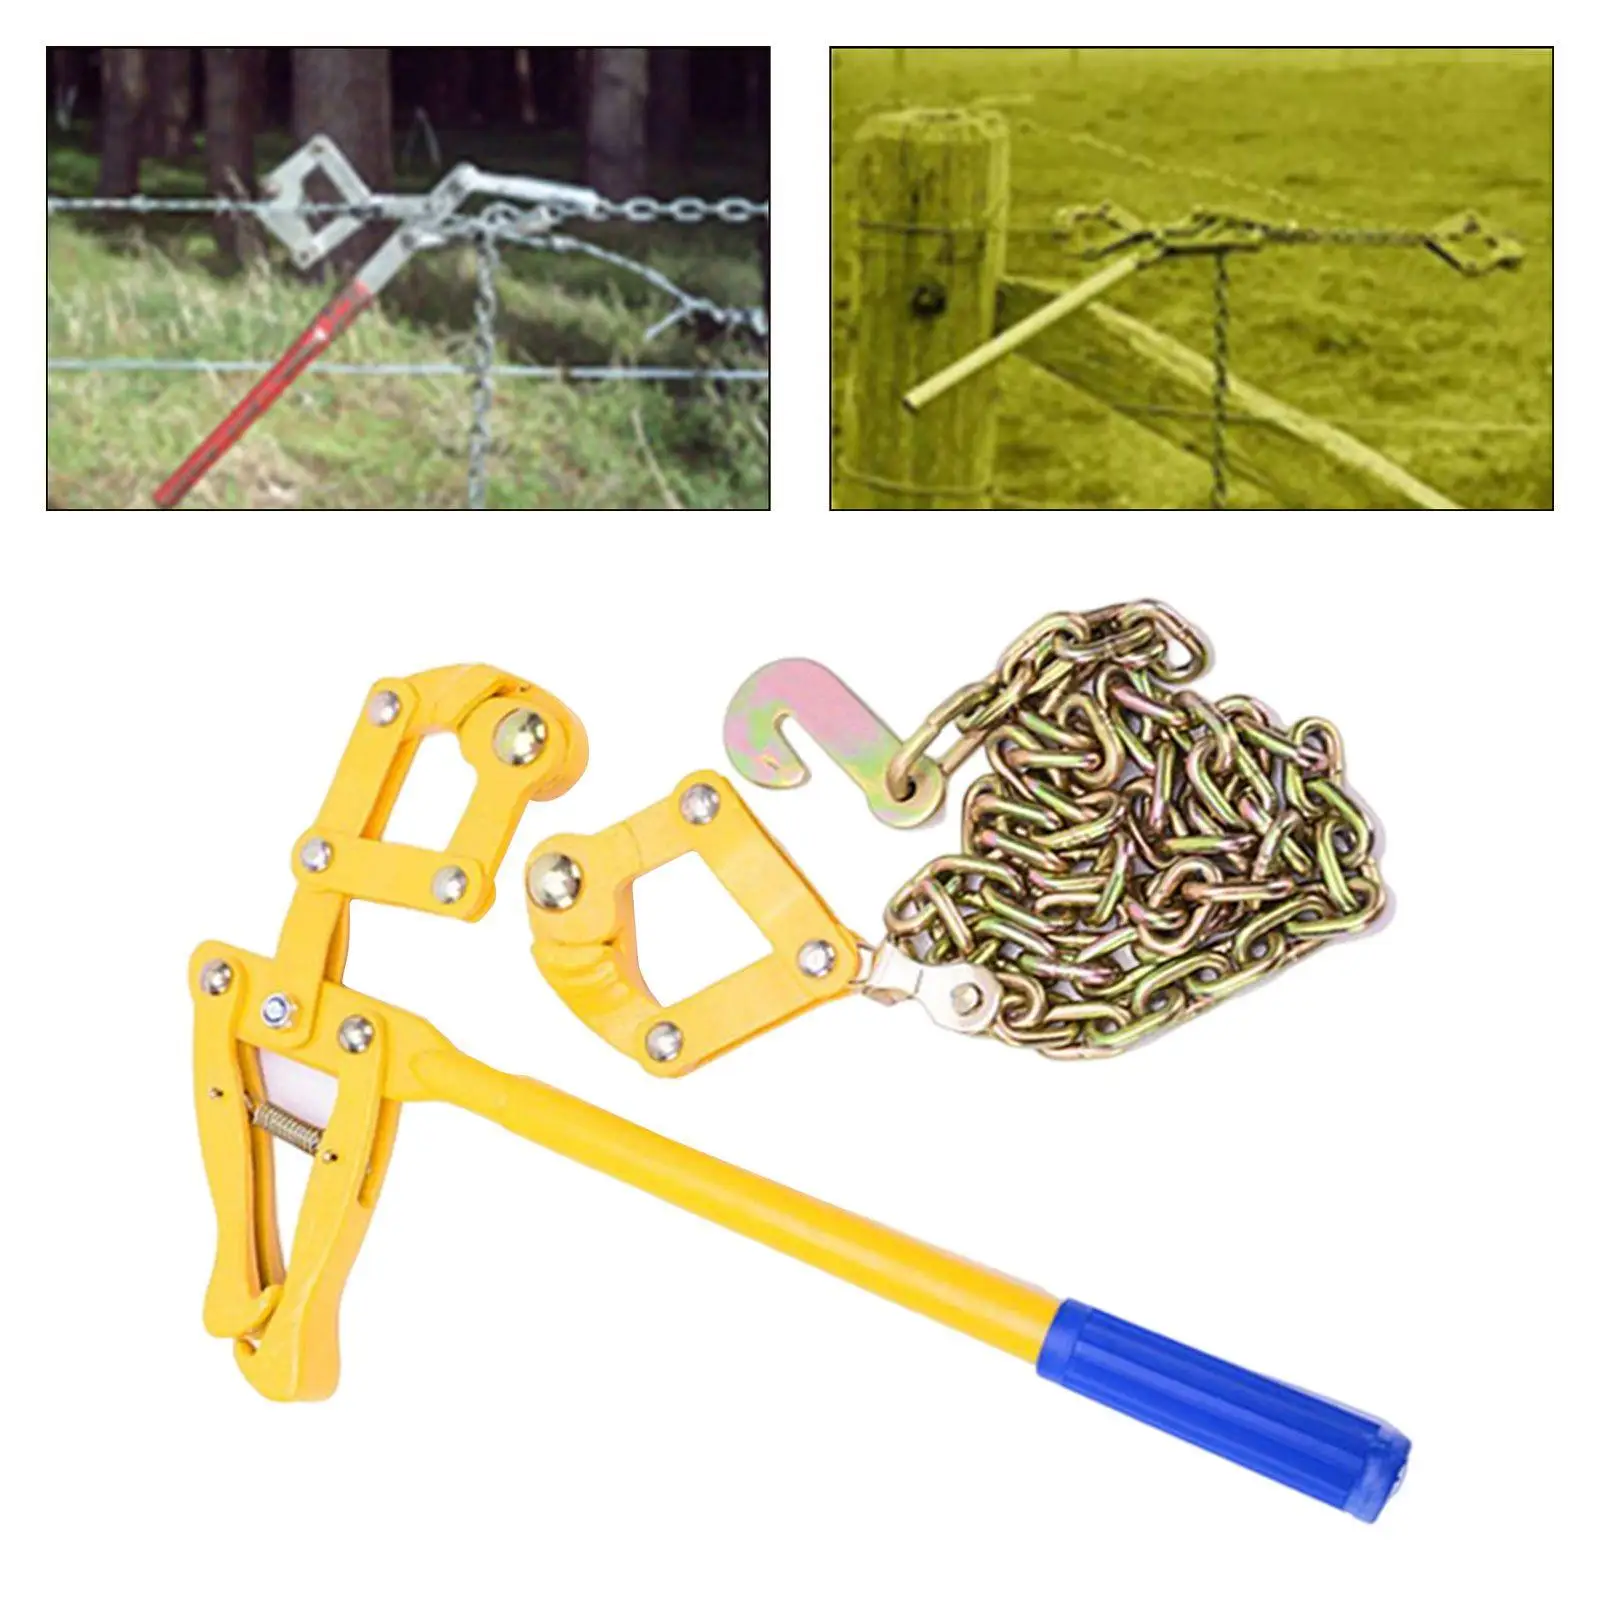 Chain Fence Strainer Electric Fence Repair Tool Fence Plain Barbed Wire Strainer for Plain Barbed Wire Stretcher Tool